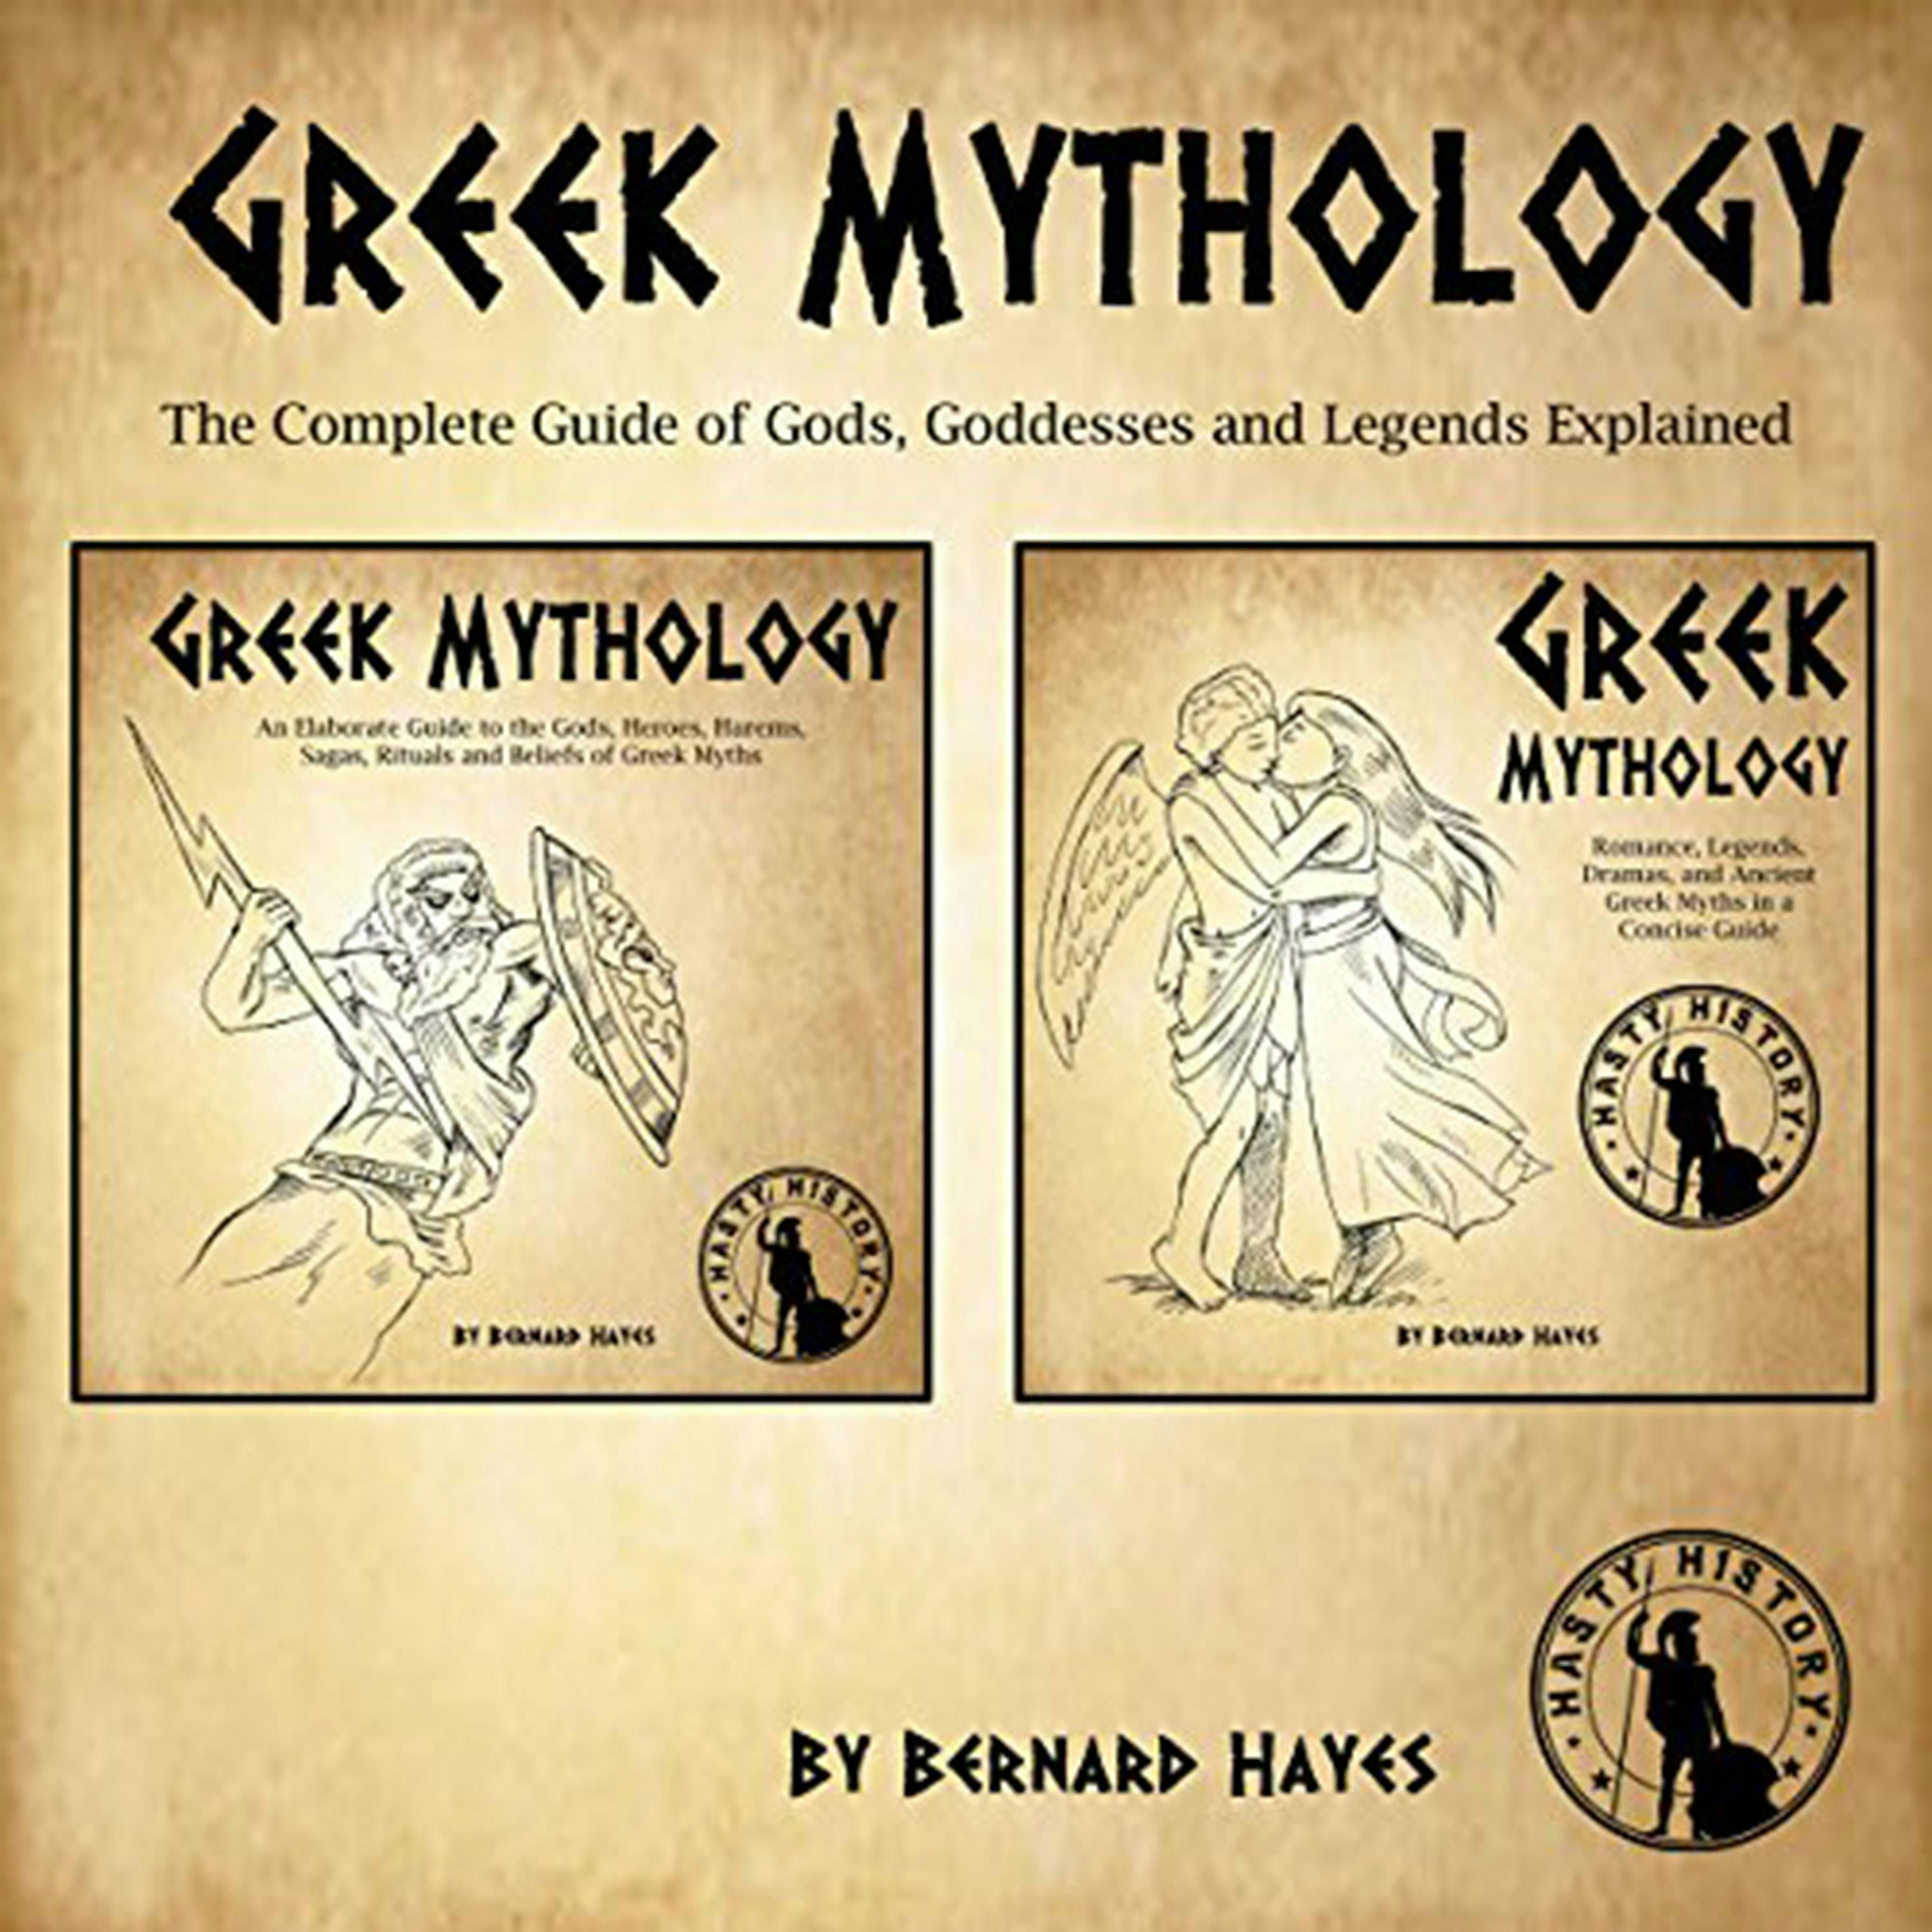 Greek Mythology: An Elaborate Guide to the Gods, Heroes, Harems, Sagas, Rituals and Beliefs of Greek Myths - Bernard Hayes